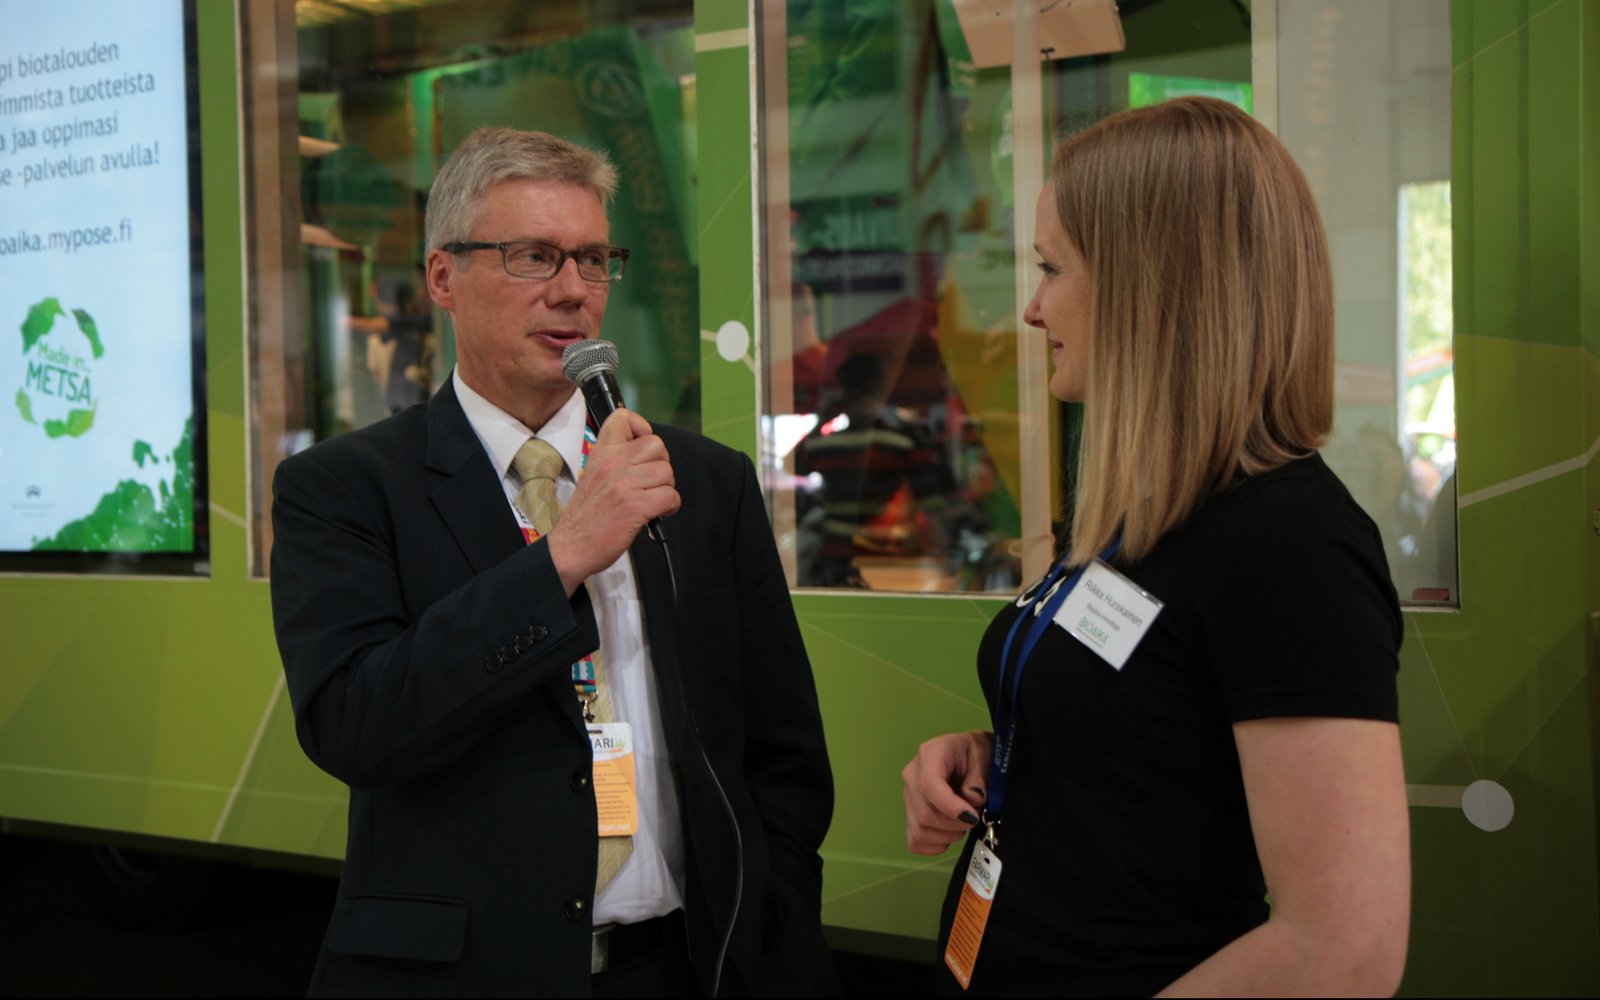 "The Bio Era is the future," says Jorma Rasinmäki, the Mayor of Seinäjoki, interviewed by one of the Bio Era guides Riikka Hurskainen. "The younger you are when learning about these themes, the better the innovations will be." Photo: Anna Kauppi